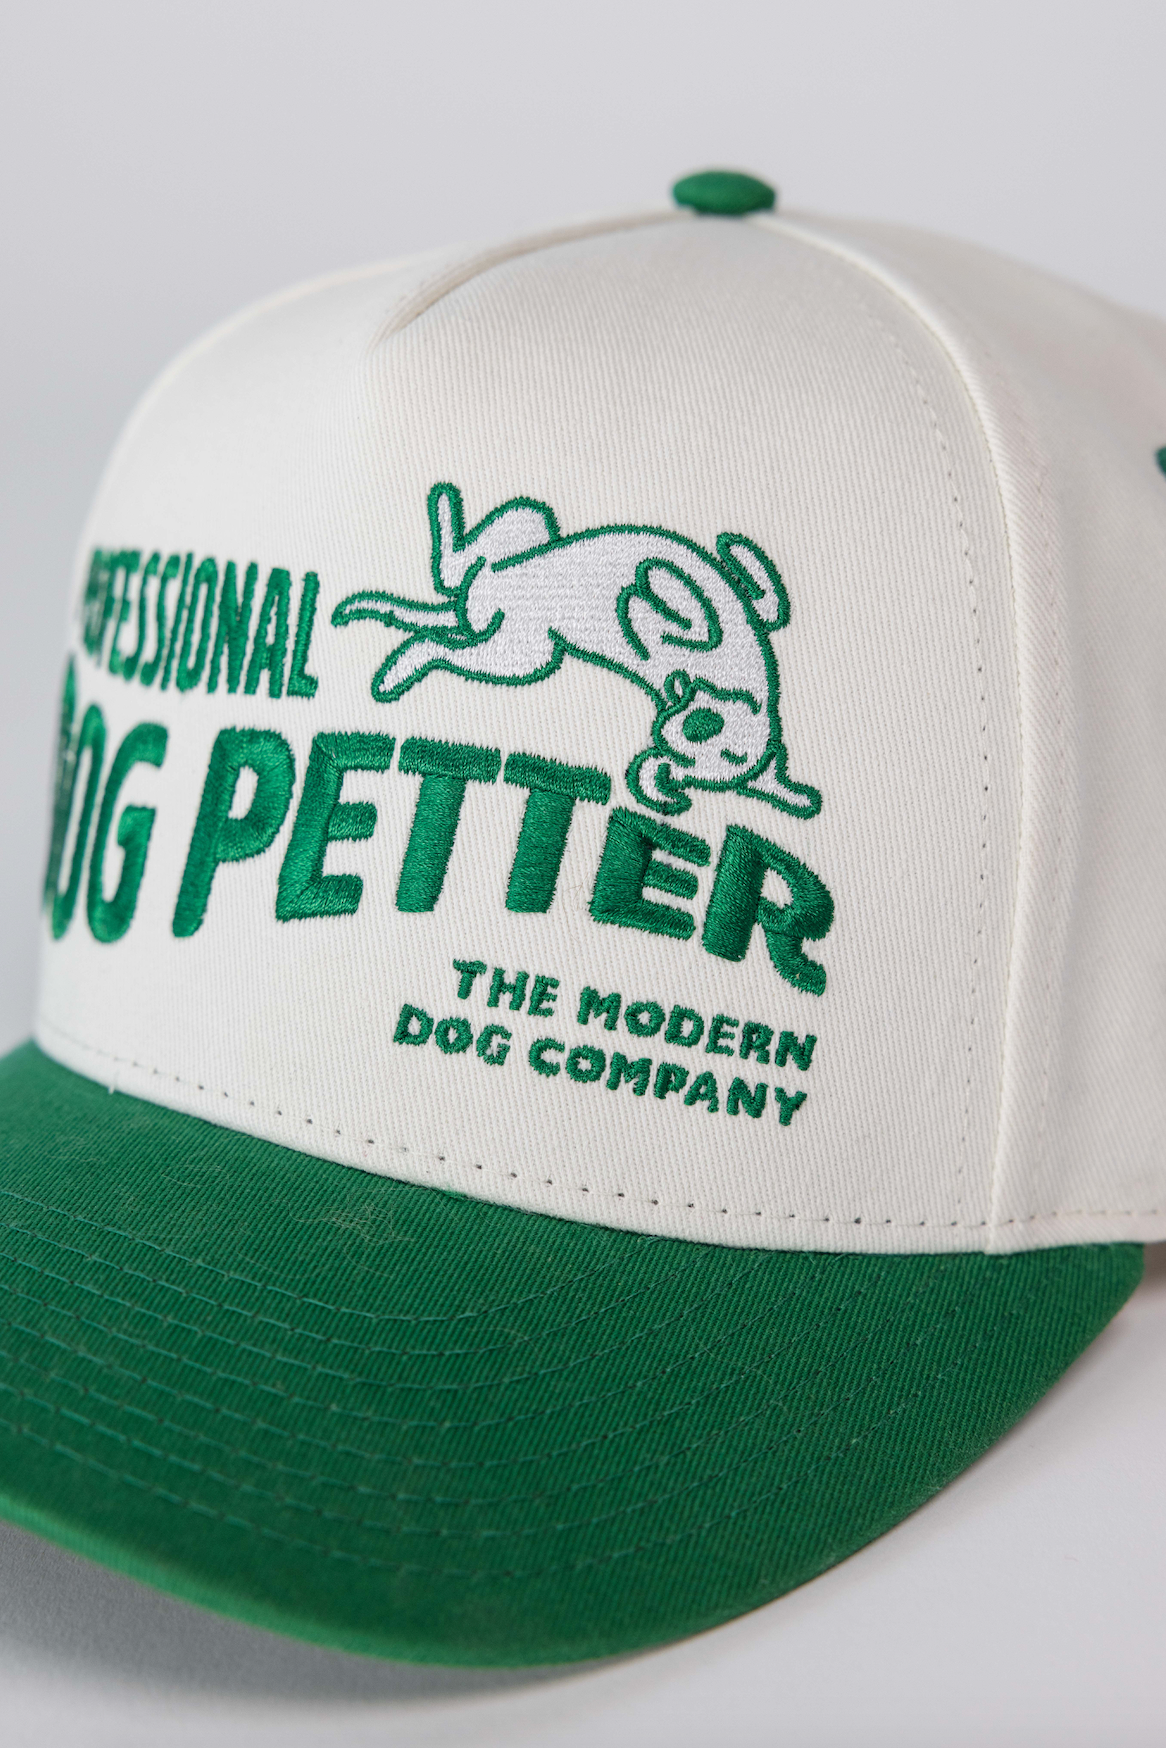 Professional Dog Petter Hat - Two Toned